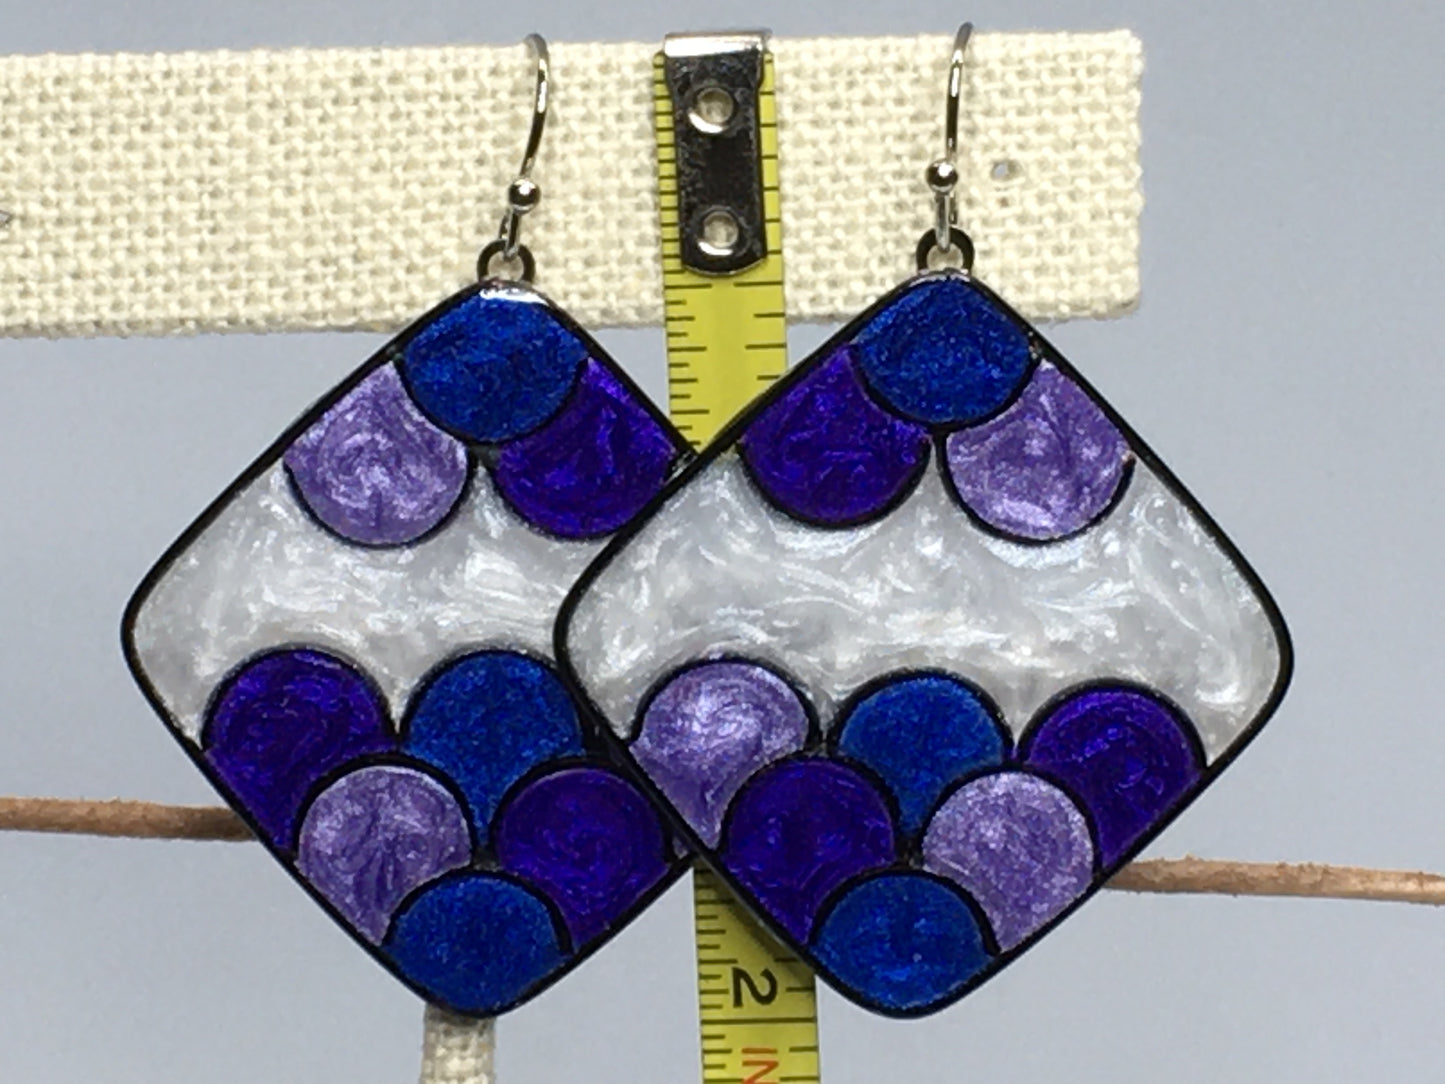 Purple, blue and white earrings